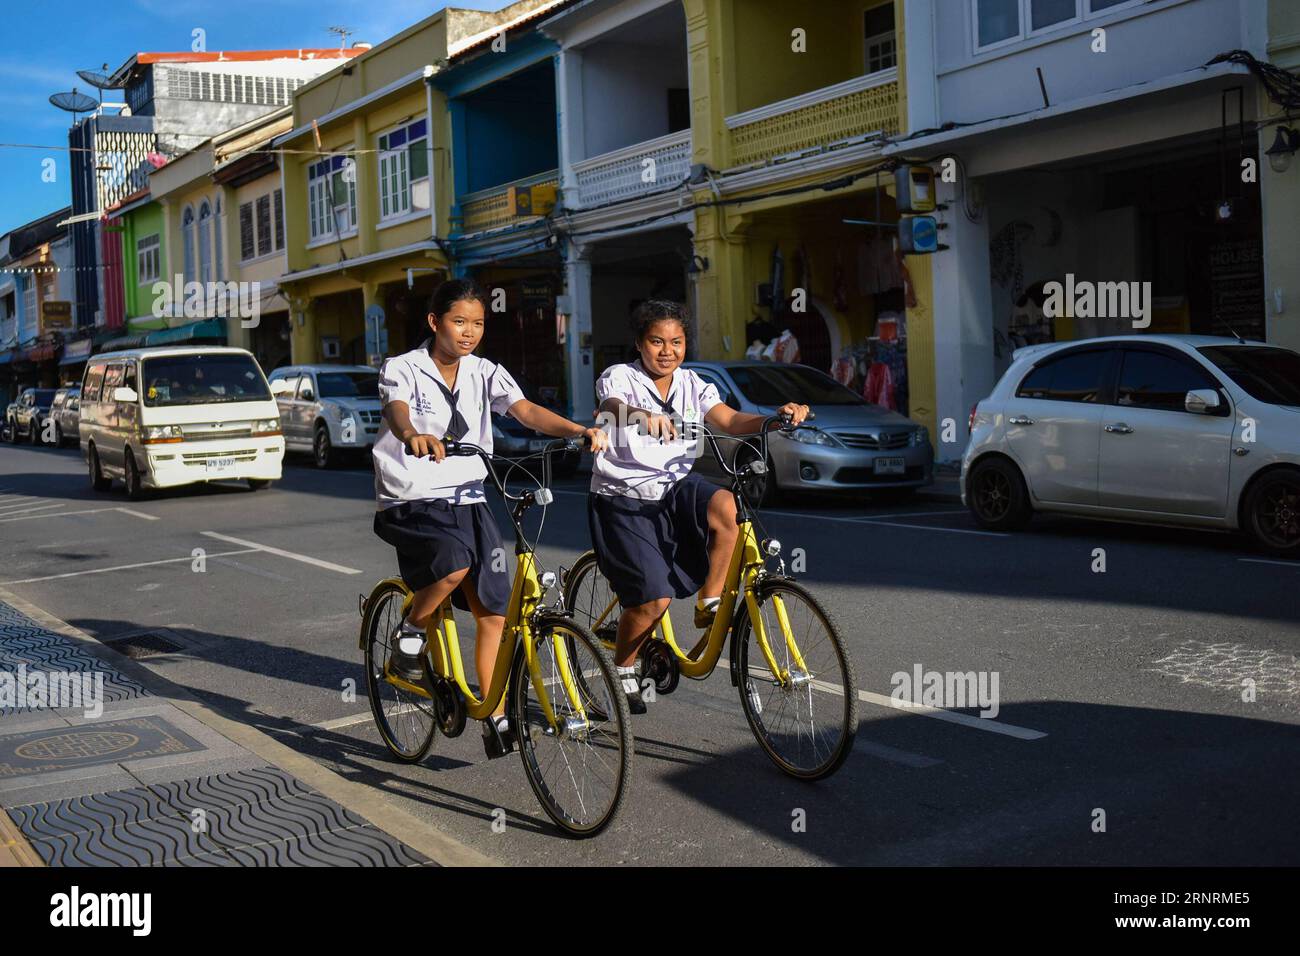 (171008) -- BEIJING, Oct. 8, 2017 -- Local students ride ofo sharing bikes at a commercial area in Phuket, Thailand, Oct. 5, 2017. China s dock-less bike-sharing company ofo provided more than 1,000 bikes in Phuket s key locations in late September and offered a 1-month free trial without deposit fee. Now the bike-sharing service has benefited local residents and tourists. Ofo s regular service fee will be charged at 5 Baht per 30 minutes usage, with a deposit fee of 99 Baht. ) WEEKLY CHOICES OF XINHUA PHOTO LixMangmang PUBLICATIONxNOTxINxCHN Stock Photo